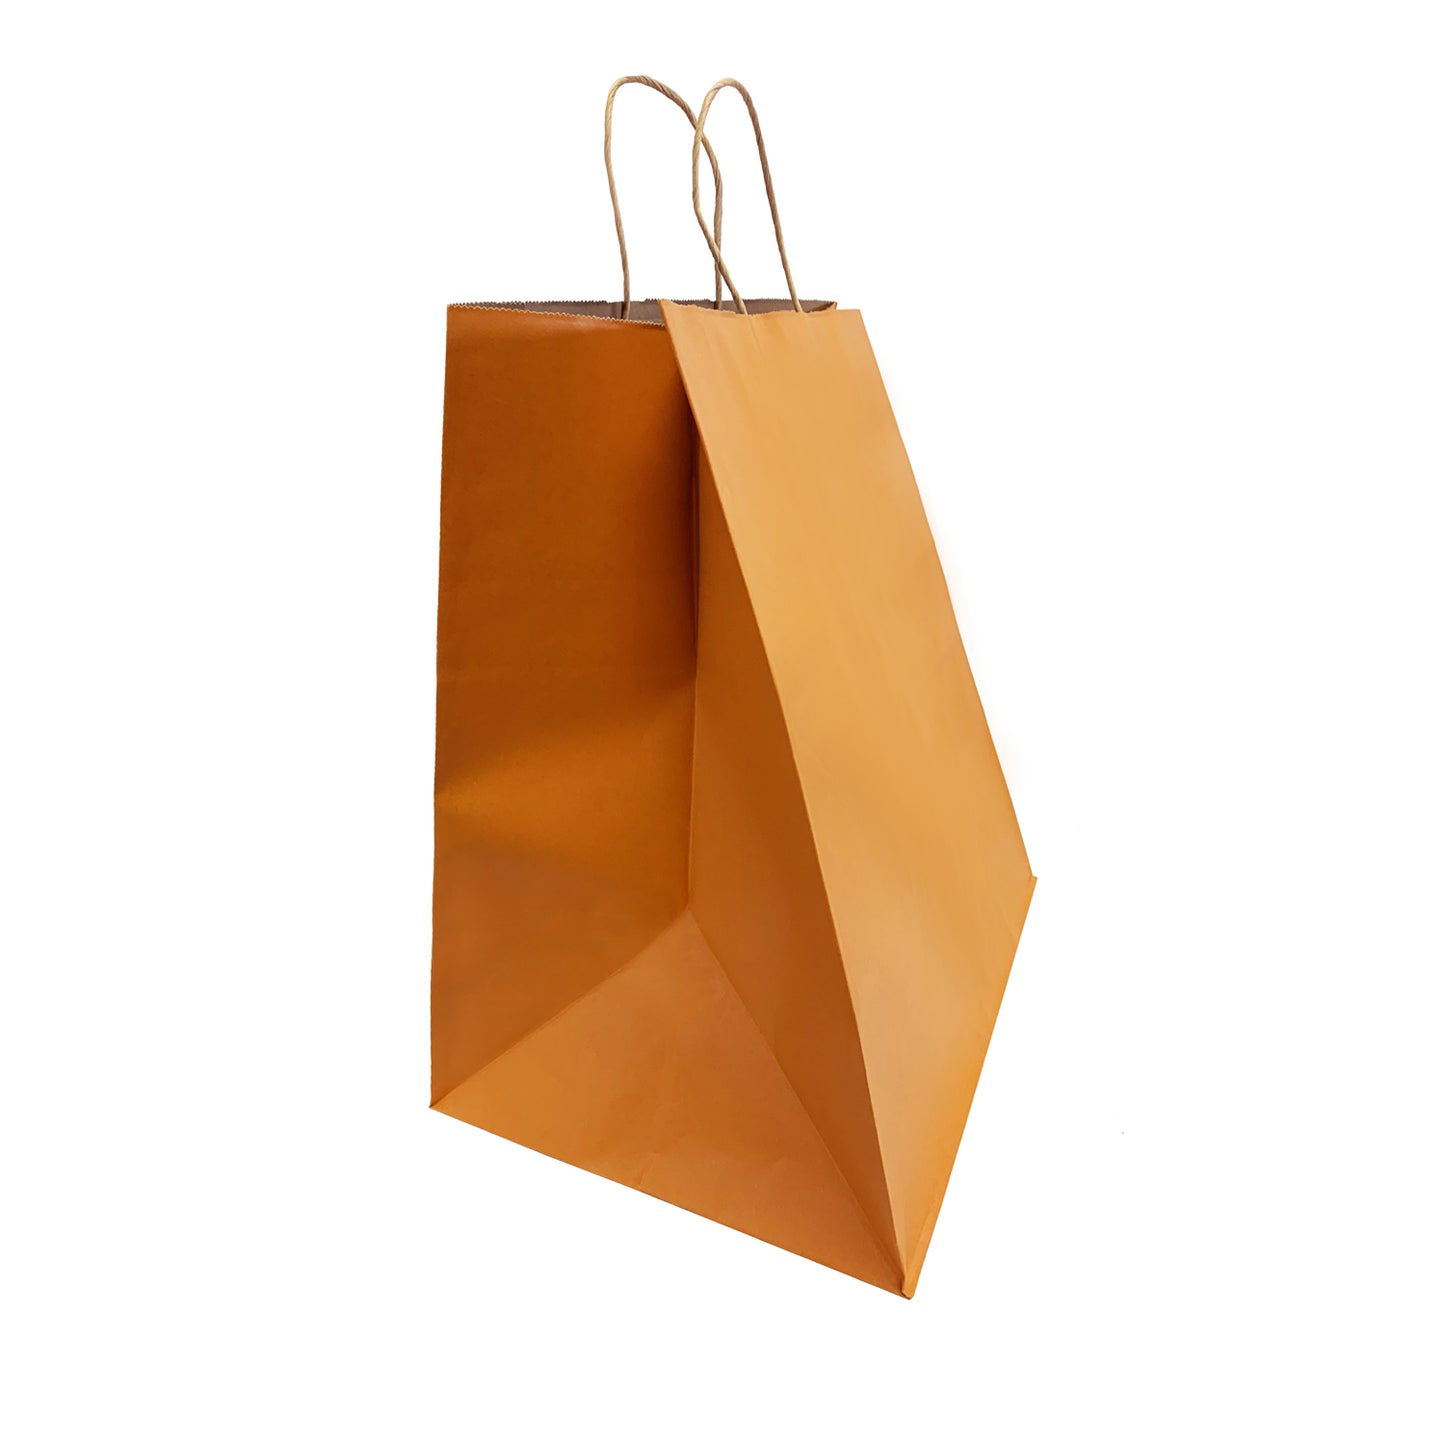 150 Pcs, Super Royal, 14x10x15.75 inches, Orange Kraft Paper Bags, with Twisted Handle